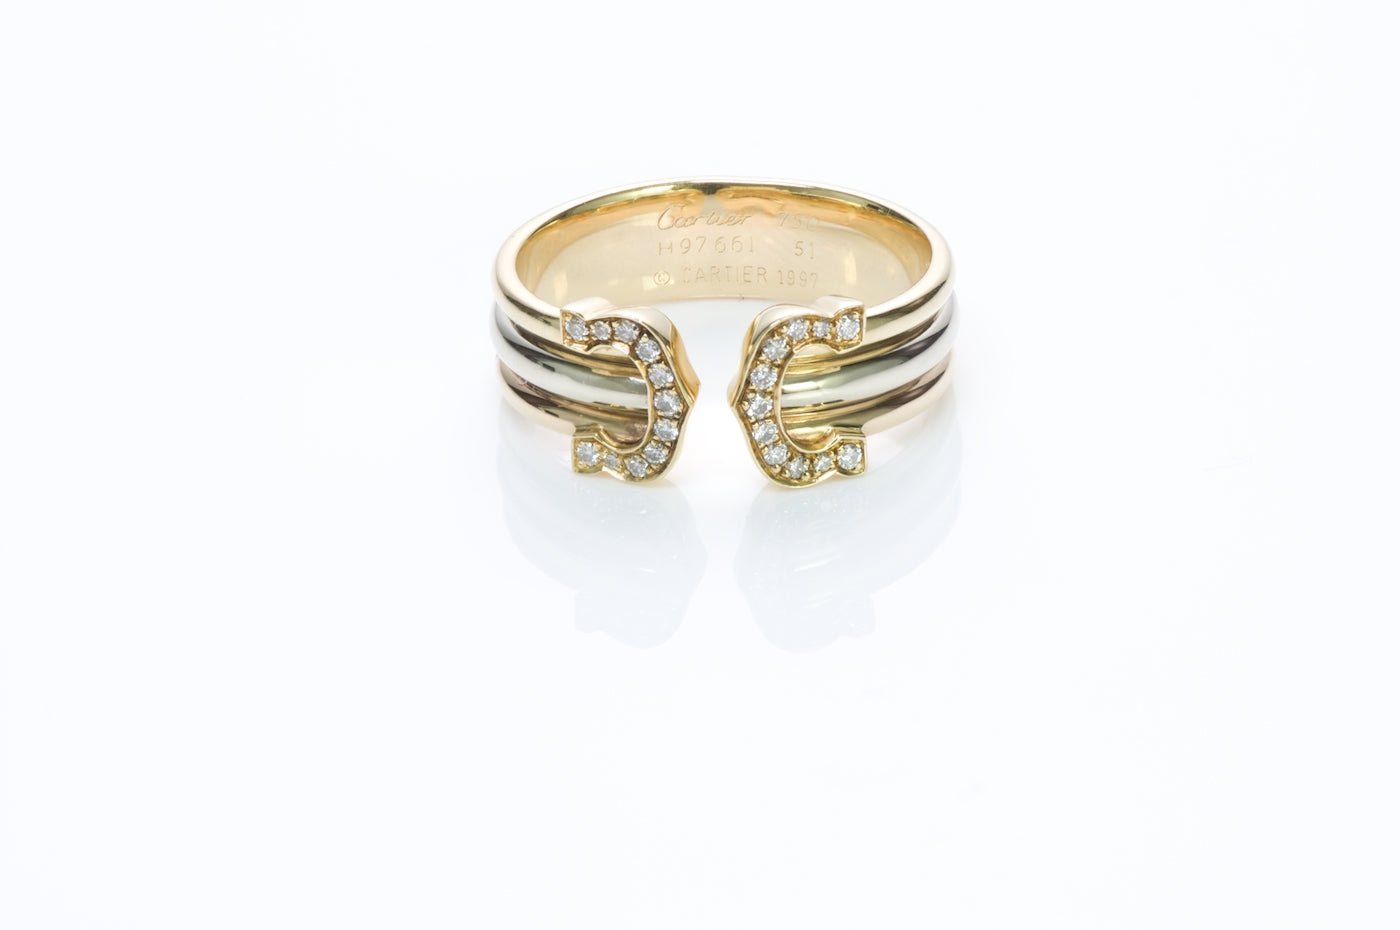 Cartier CC Gold Diamond Ring - DSF Antique Jewelry